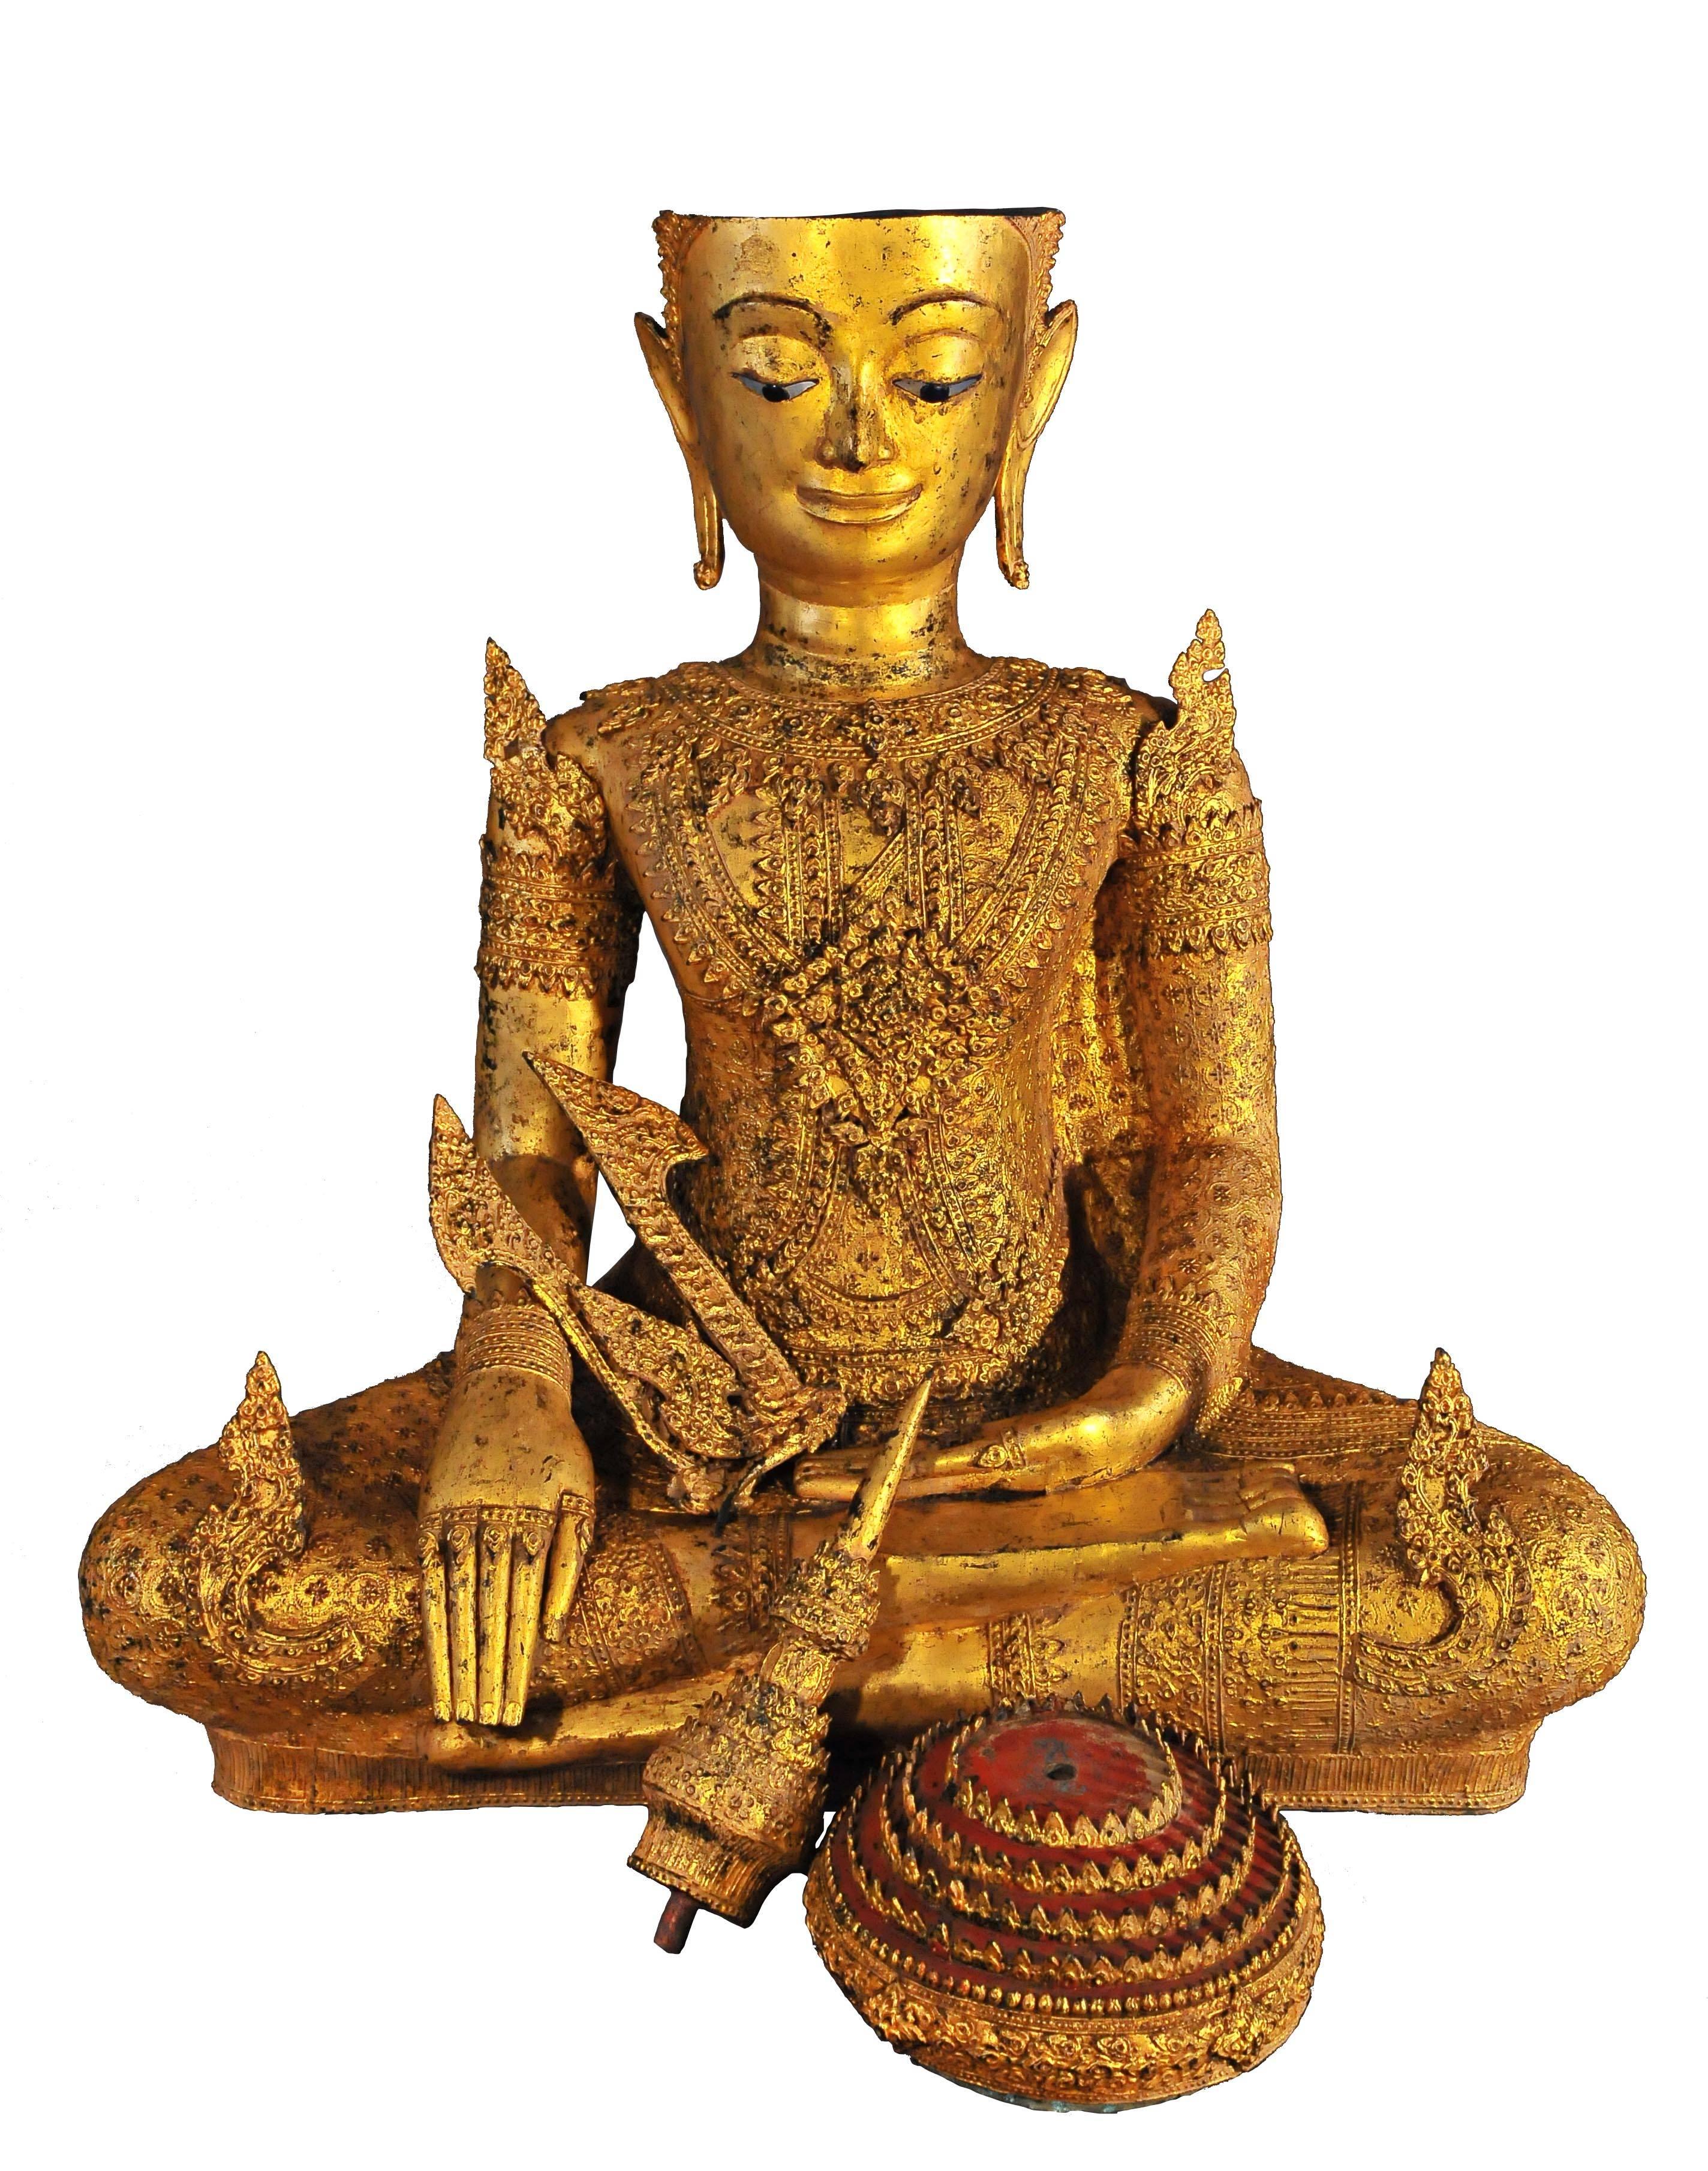 The adorned image of the Buddha has a growing importance in the art of Thailand. The oldest representations are imbued with a perfect beauty in which the attention is particularly directed to the headdress made of a mukuta (cover-usniça) with